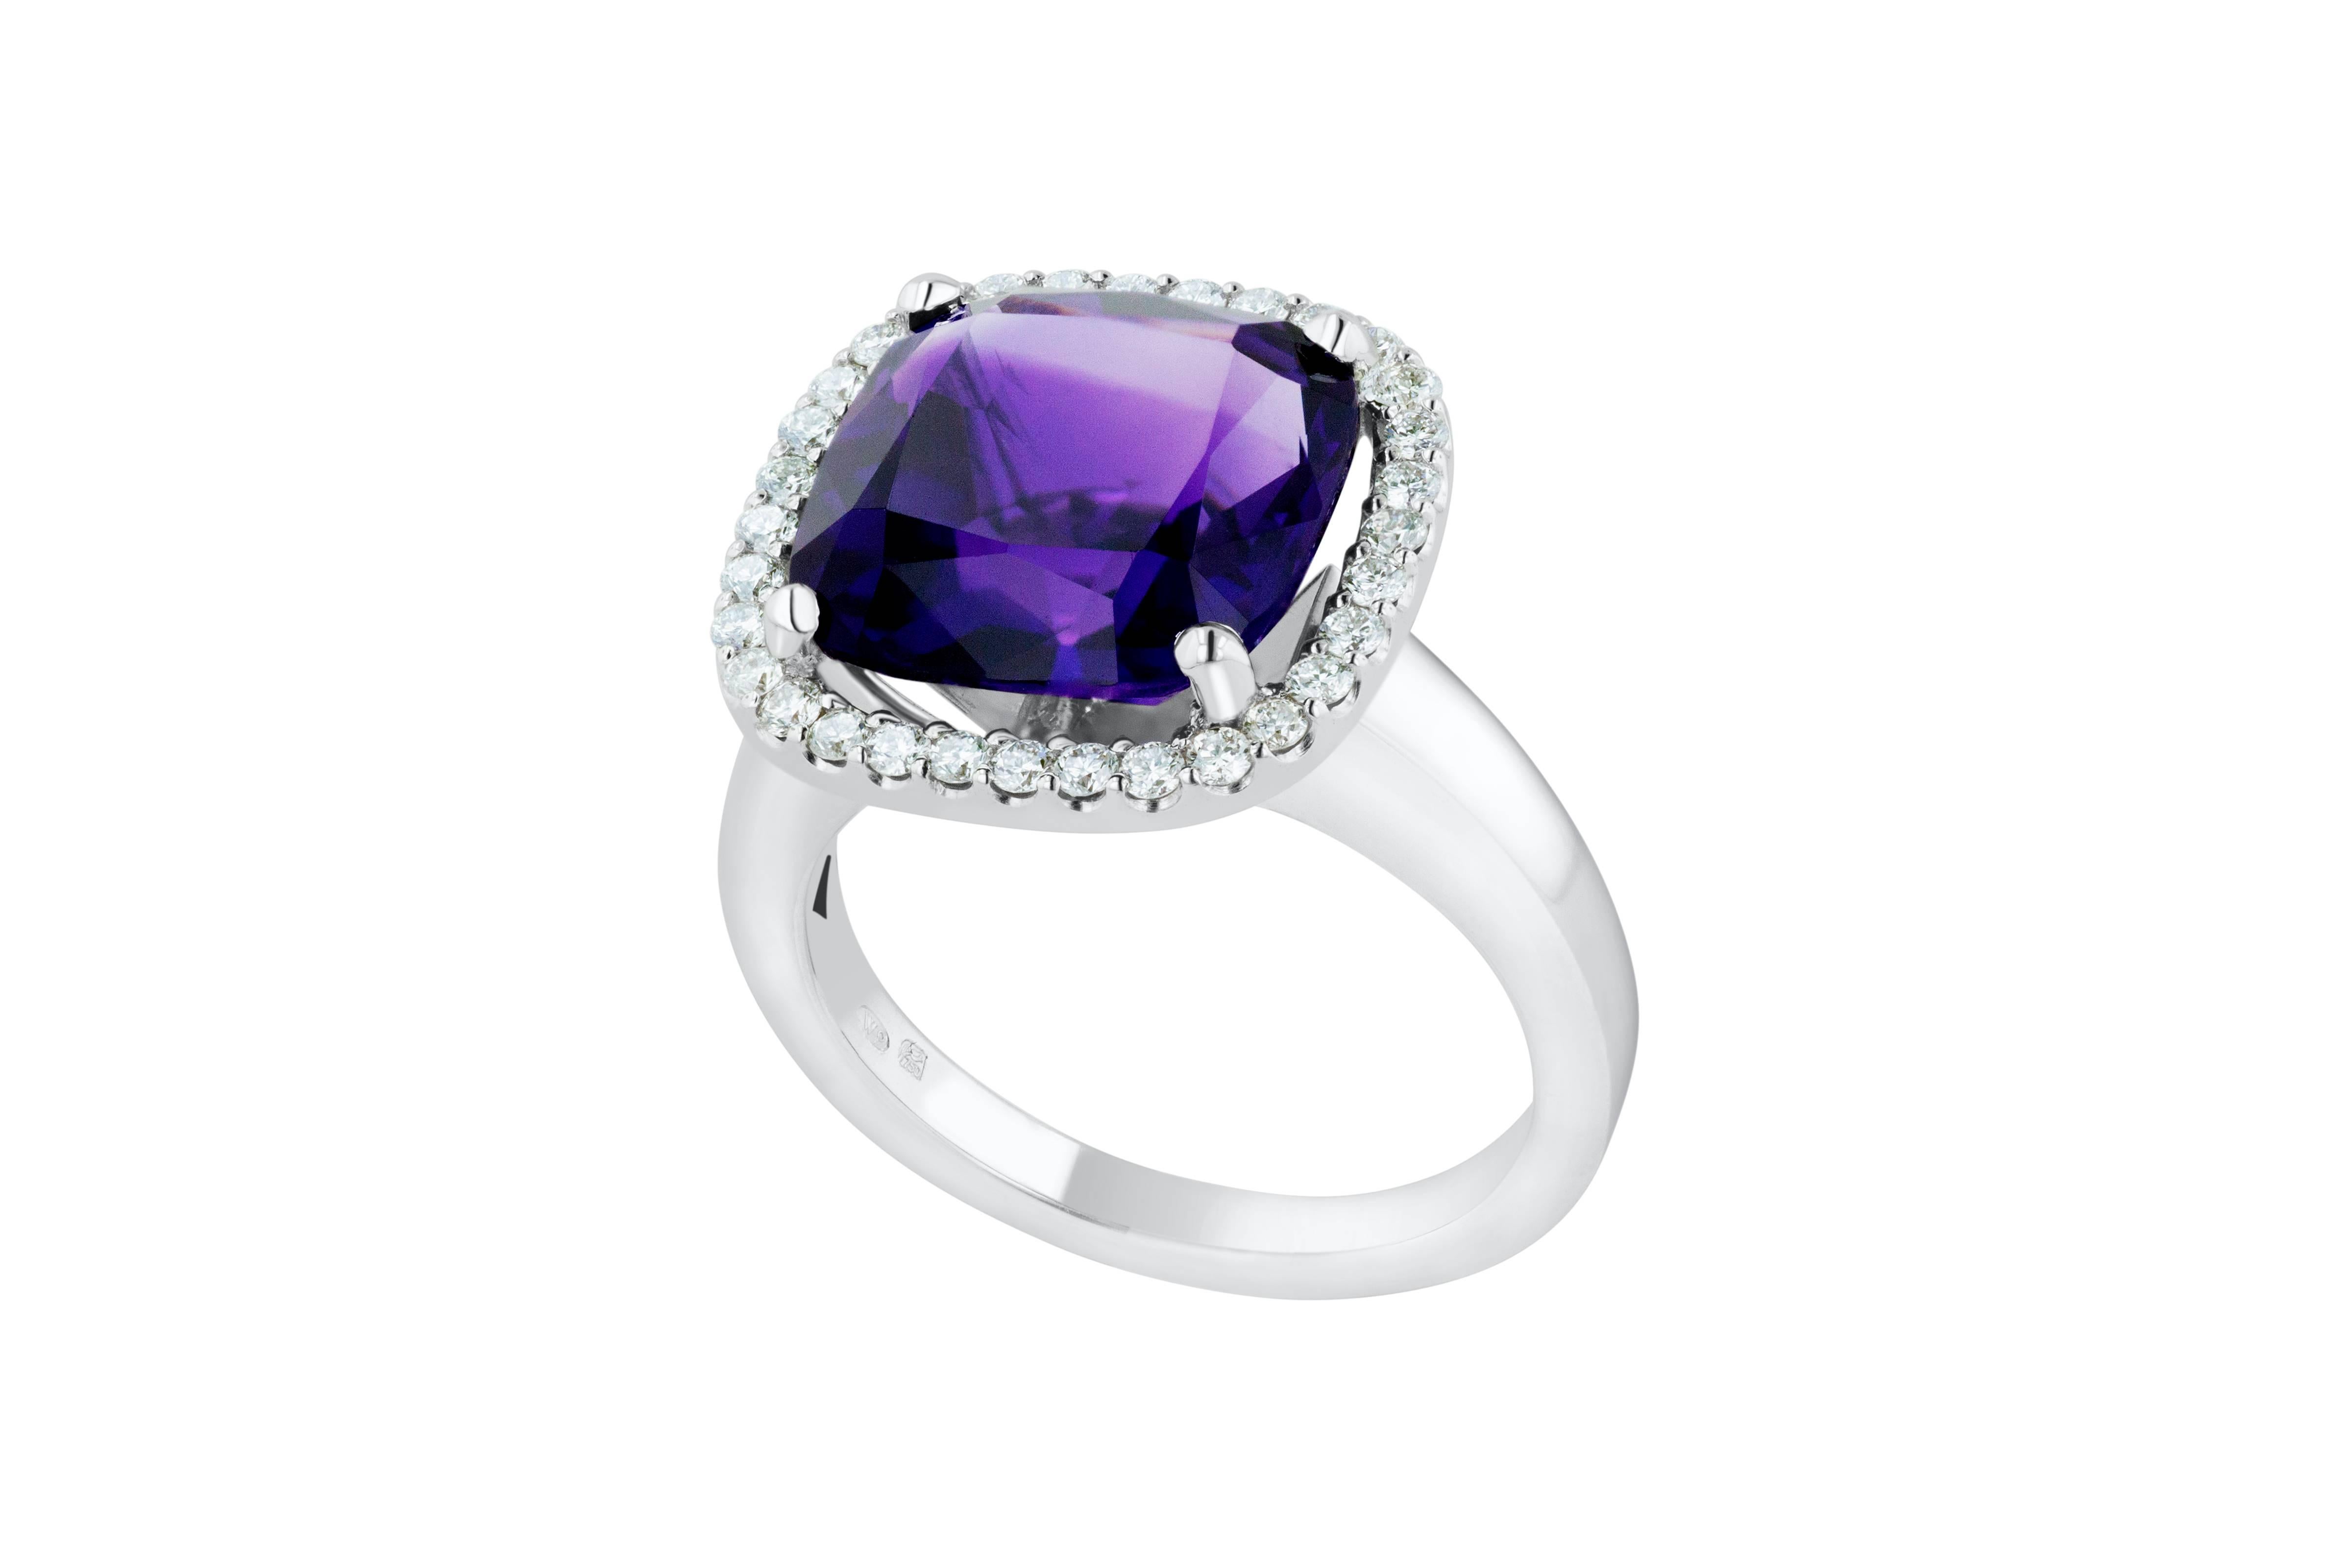 Brand new, handmade, purple Amethyst & Diamond cocktail ring. The white gold mounting and setting are especially designed to fully protect the cushion-cut gemstone, without losing its reflected light sparkle. The amethyst is surrounded by a halo